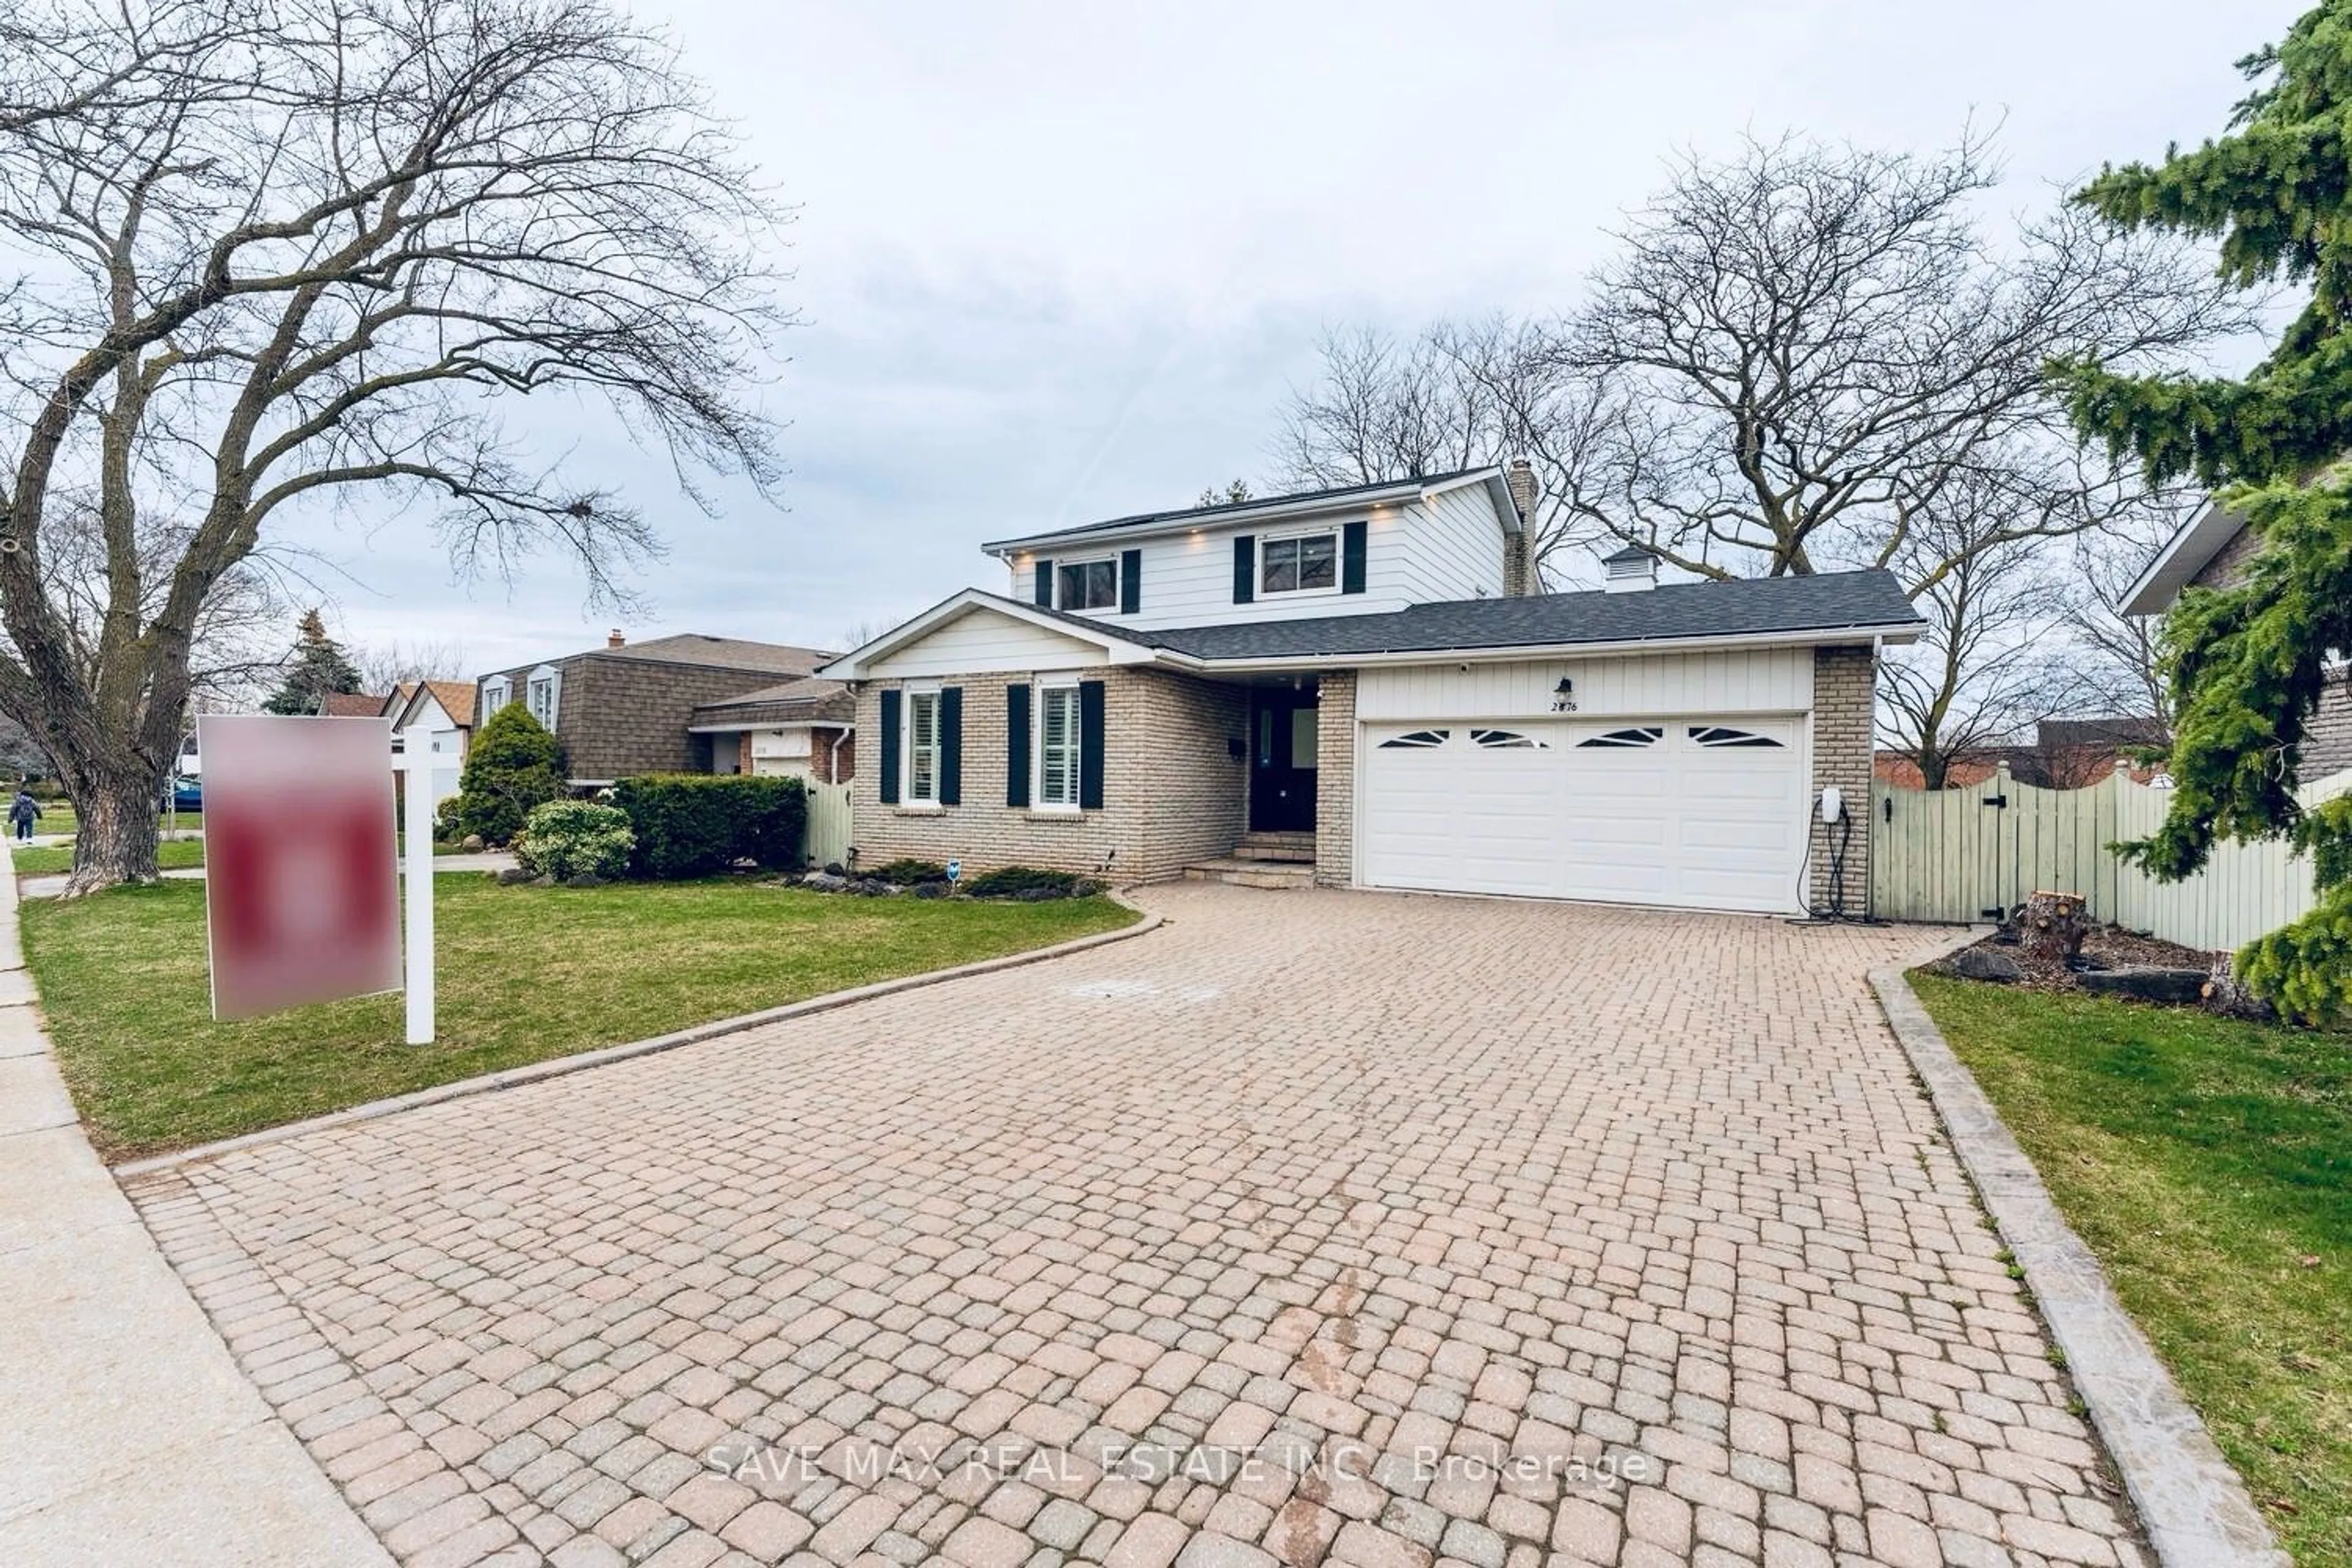 Home with brick exterior material for 2676 Thorn Lodge Dr, Mississauga Ontario L5K 1L2